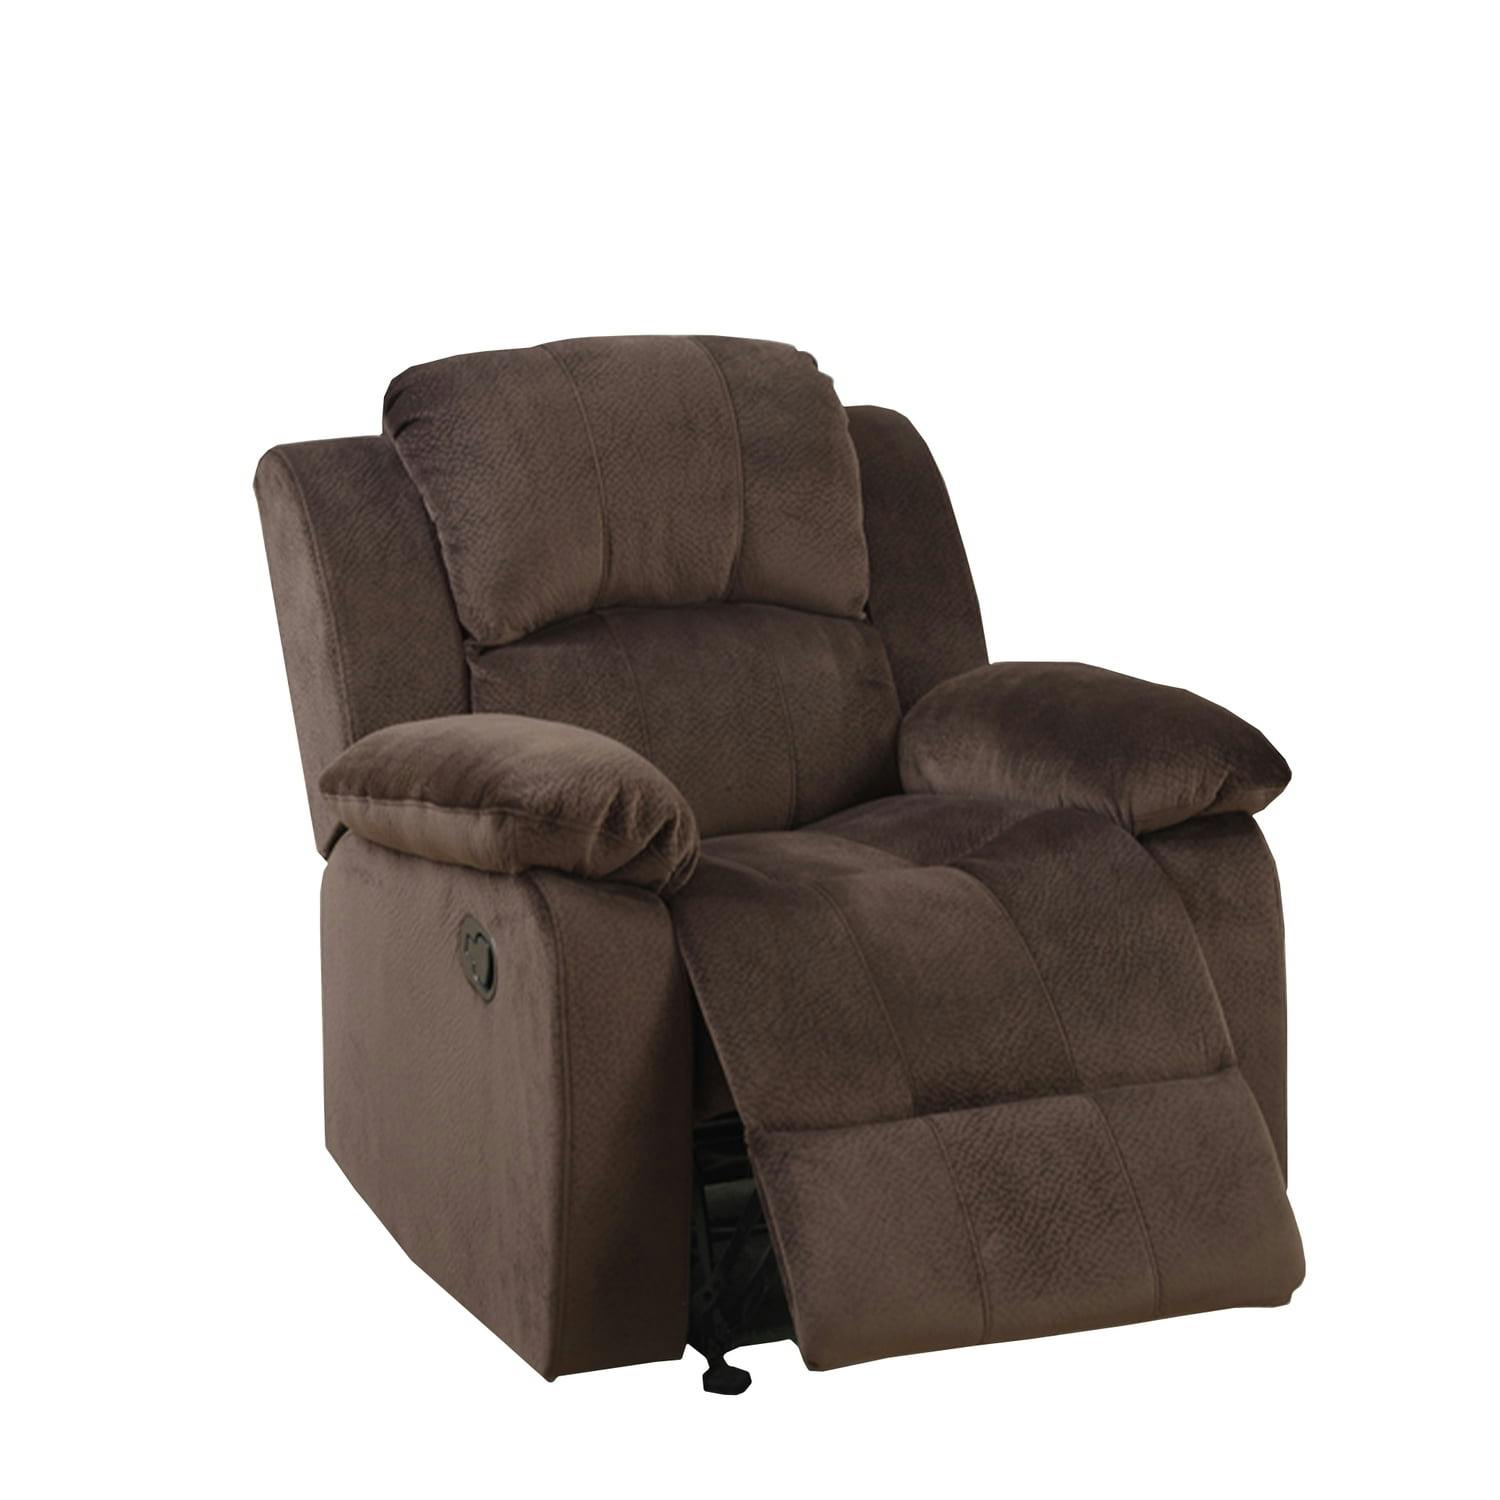 Contemporary Choco Brown Leather Rocker Recliner with Pillow Top Armrest